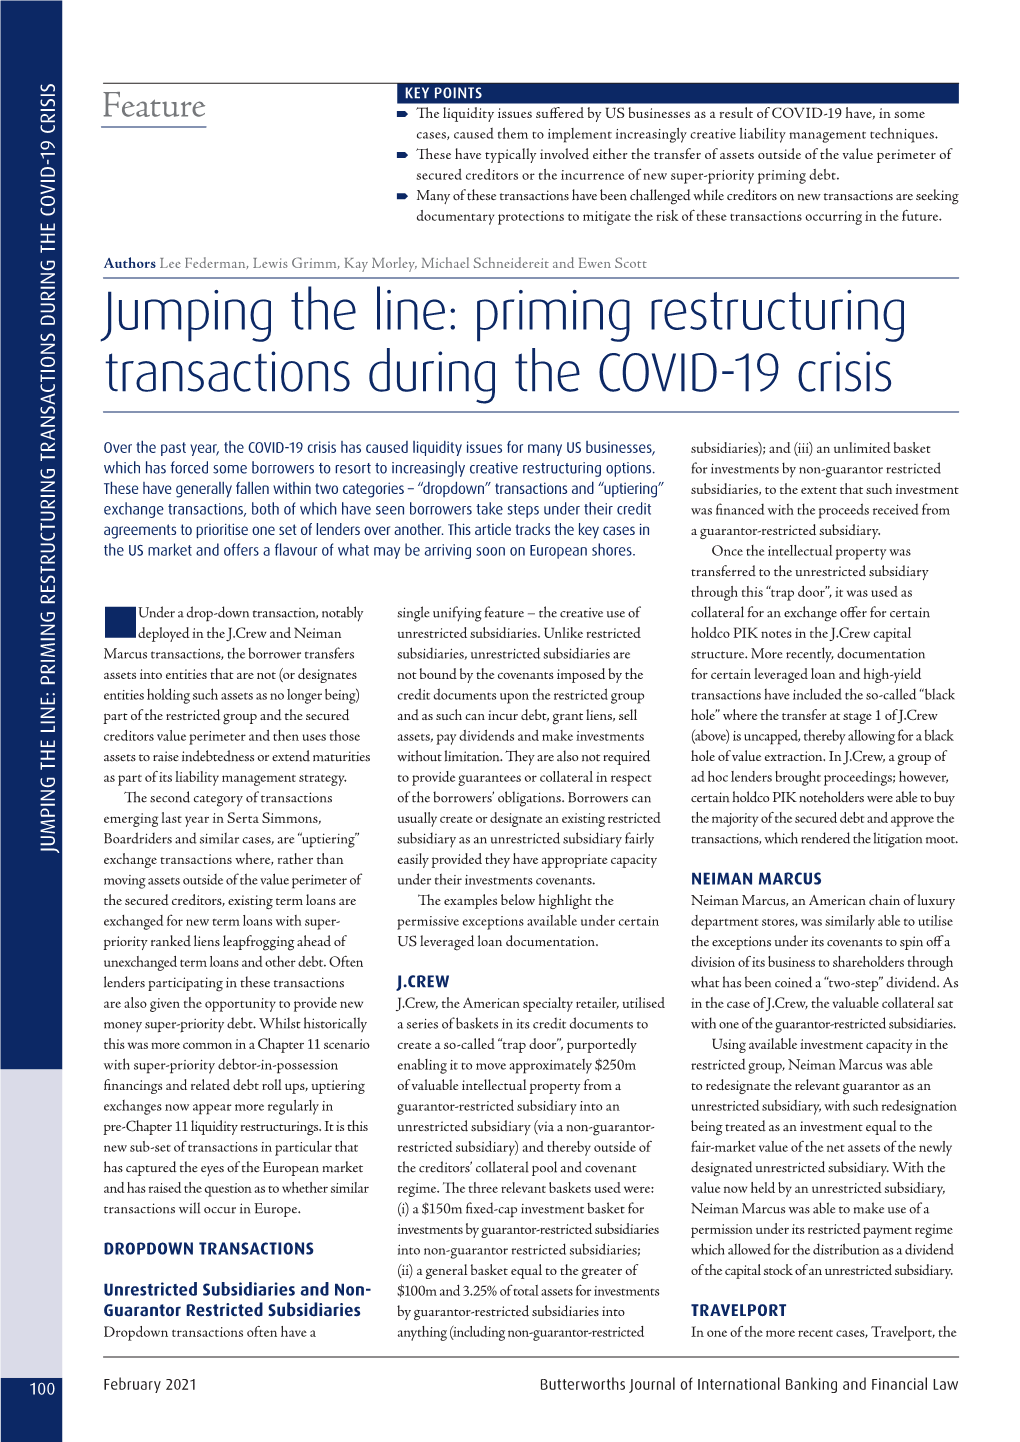 Priming Restructuring Transactions During the COVID-19 Crisis